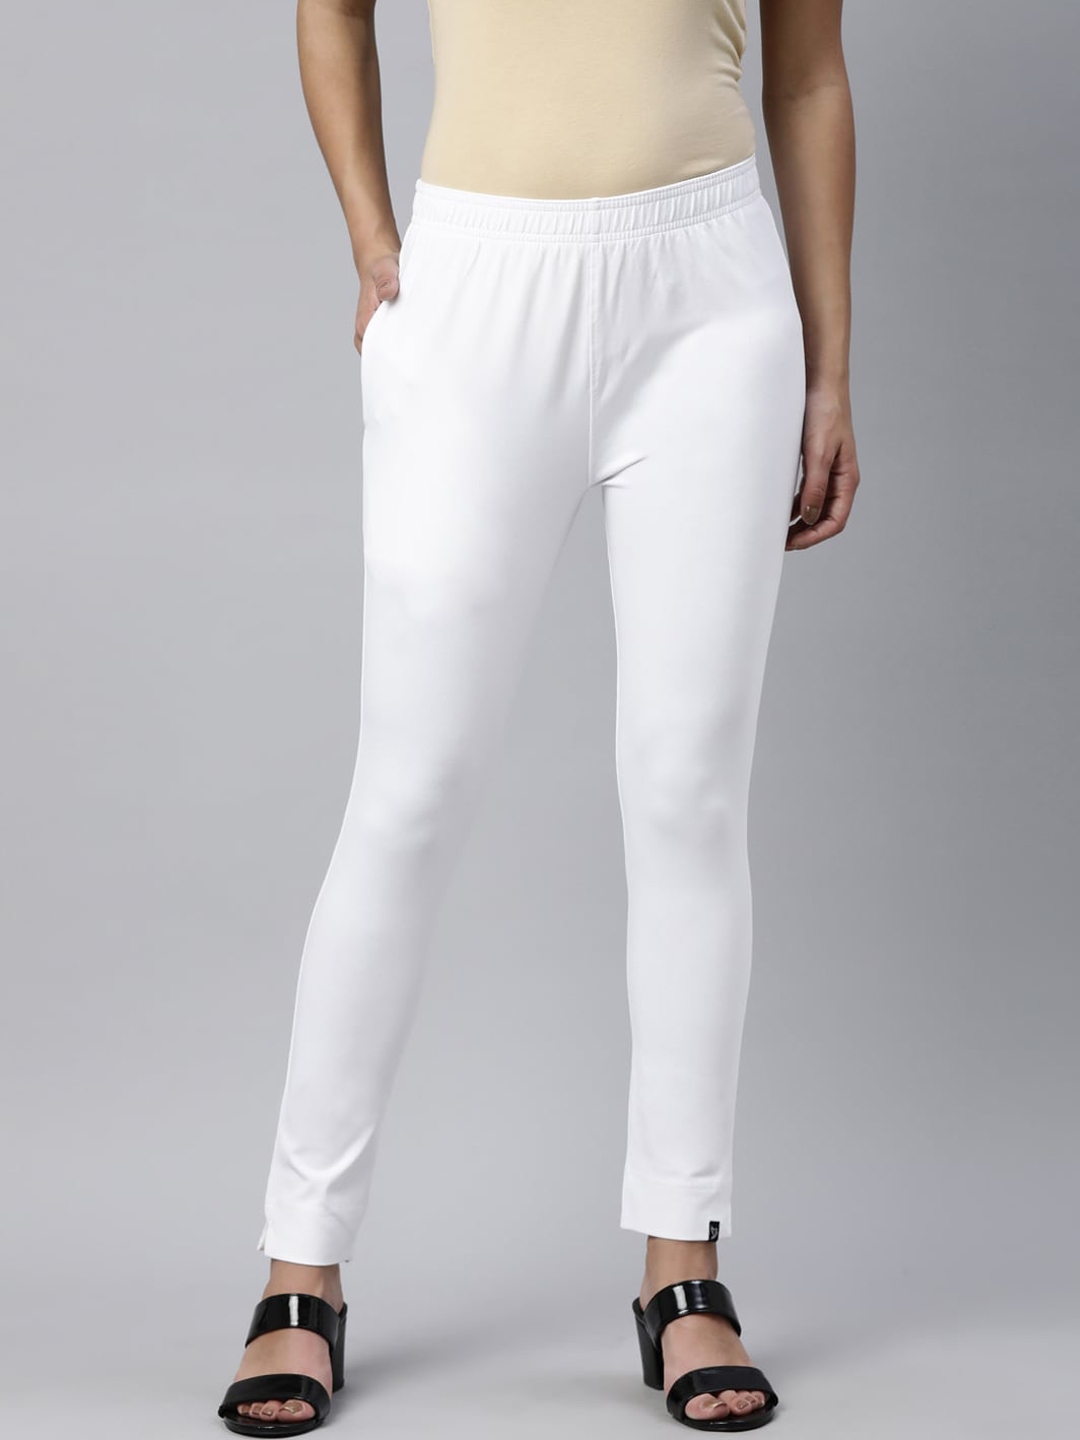 TWIN BIRDS Mid-Rise Cropped Leggings